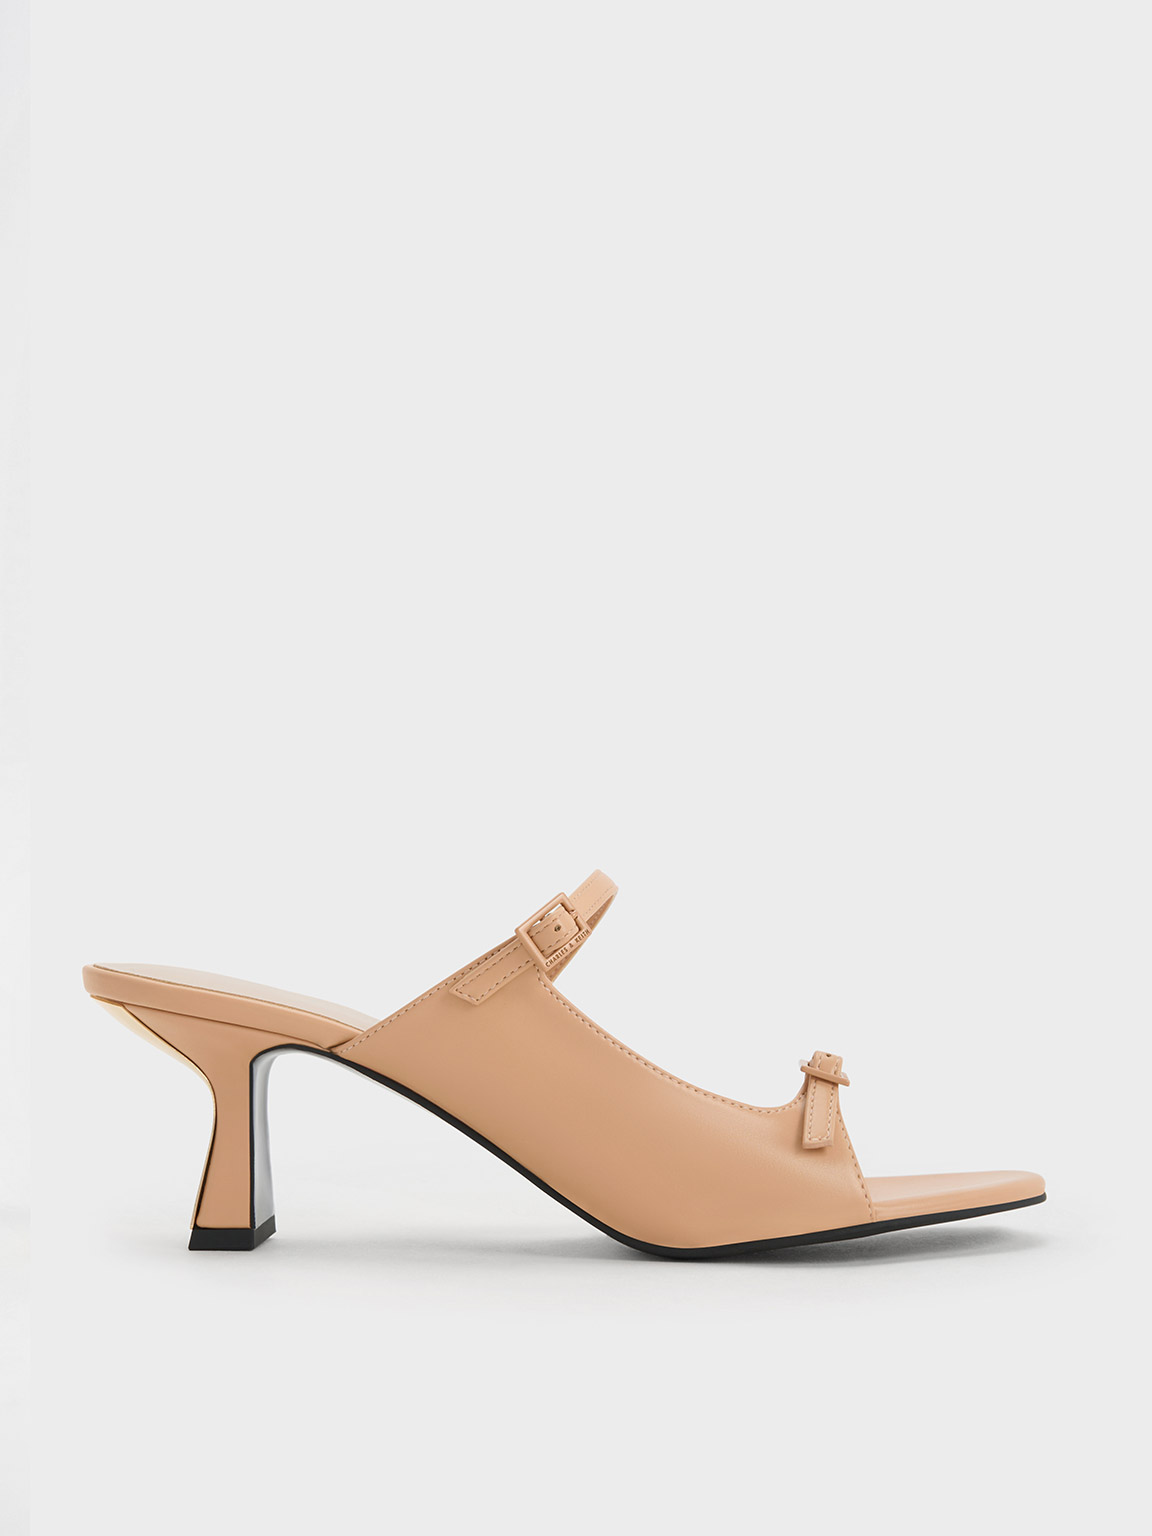 Charles & Keith - Women's Double Strap Heeled Mules, Nude, US 10